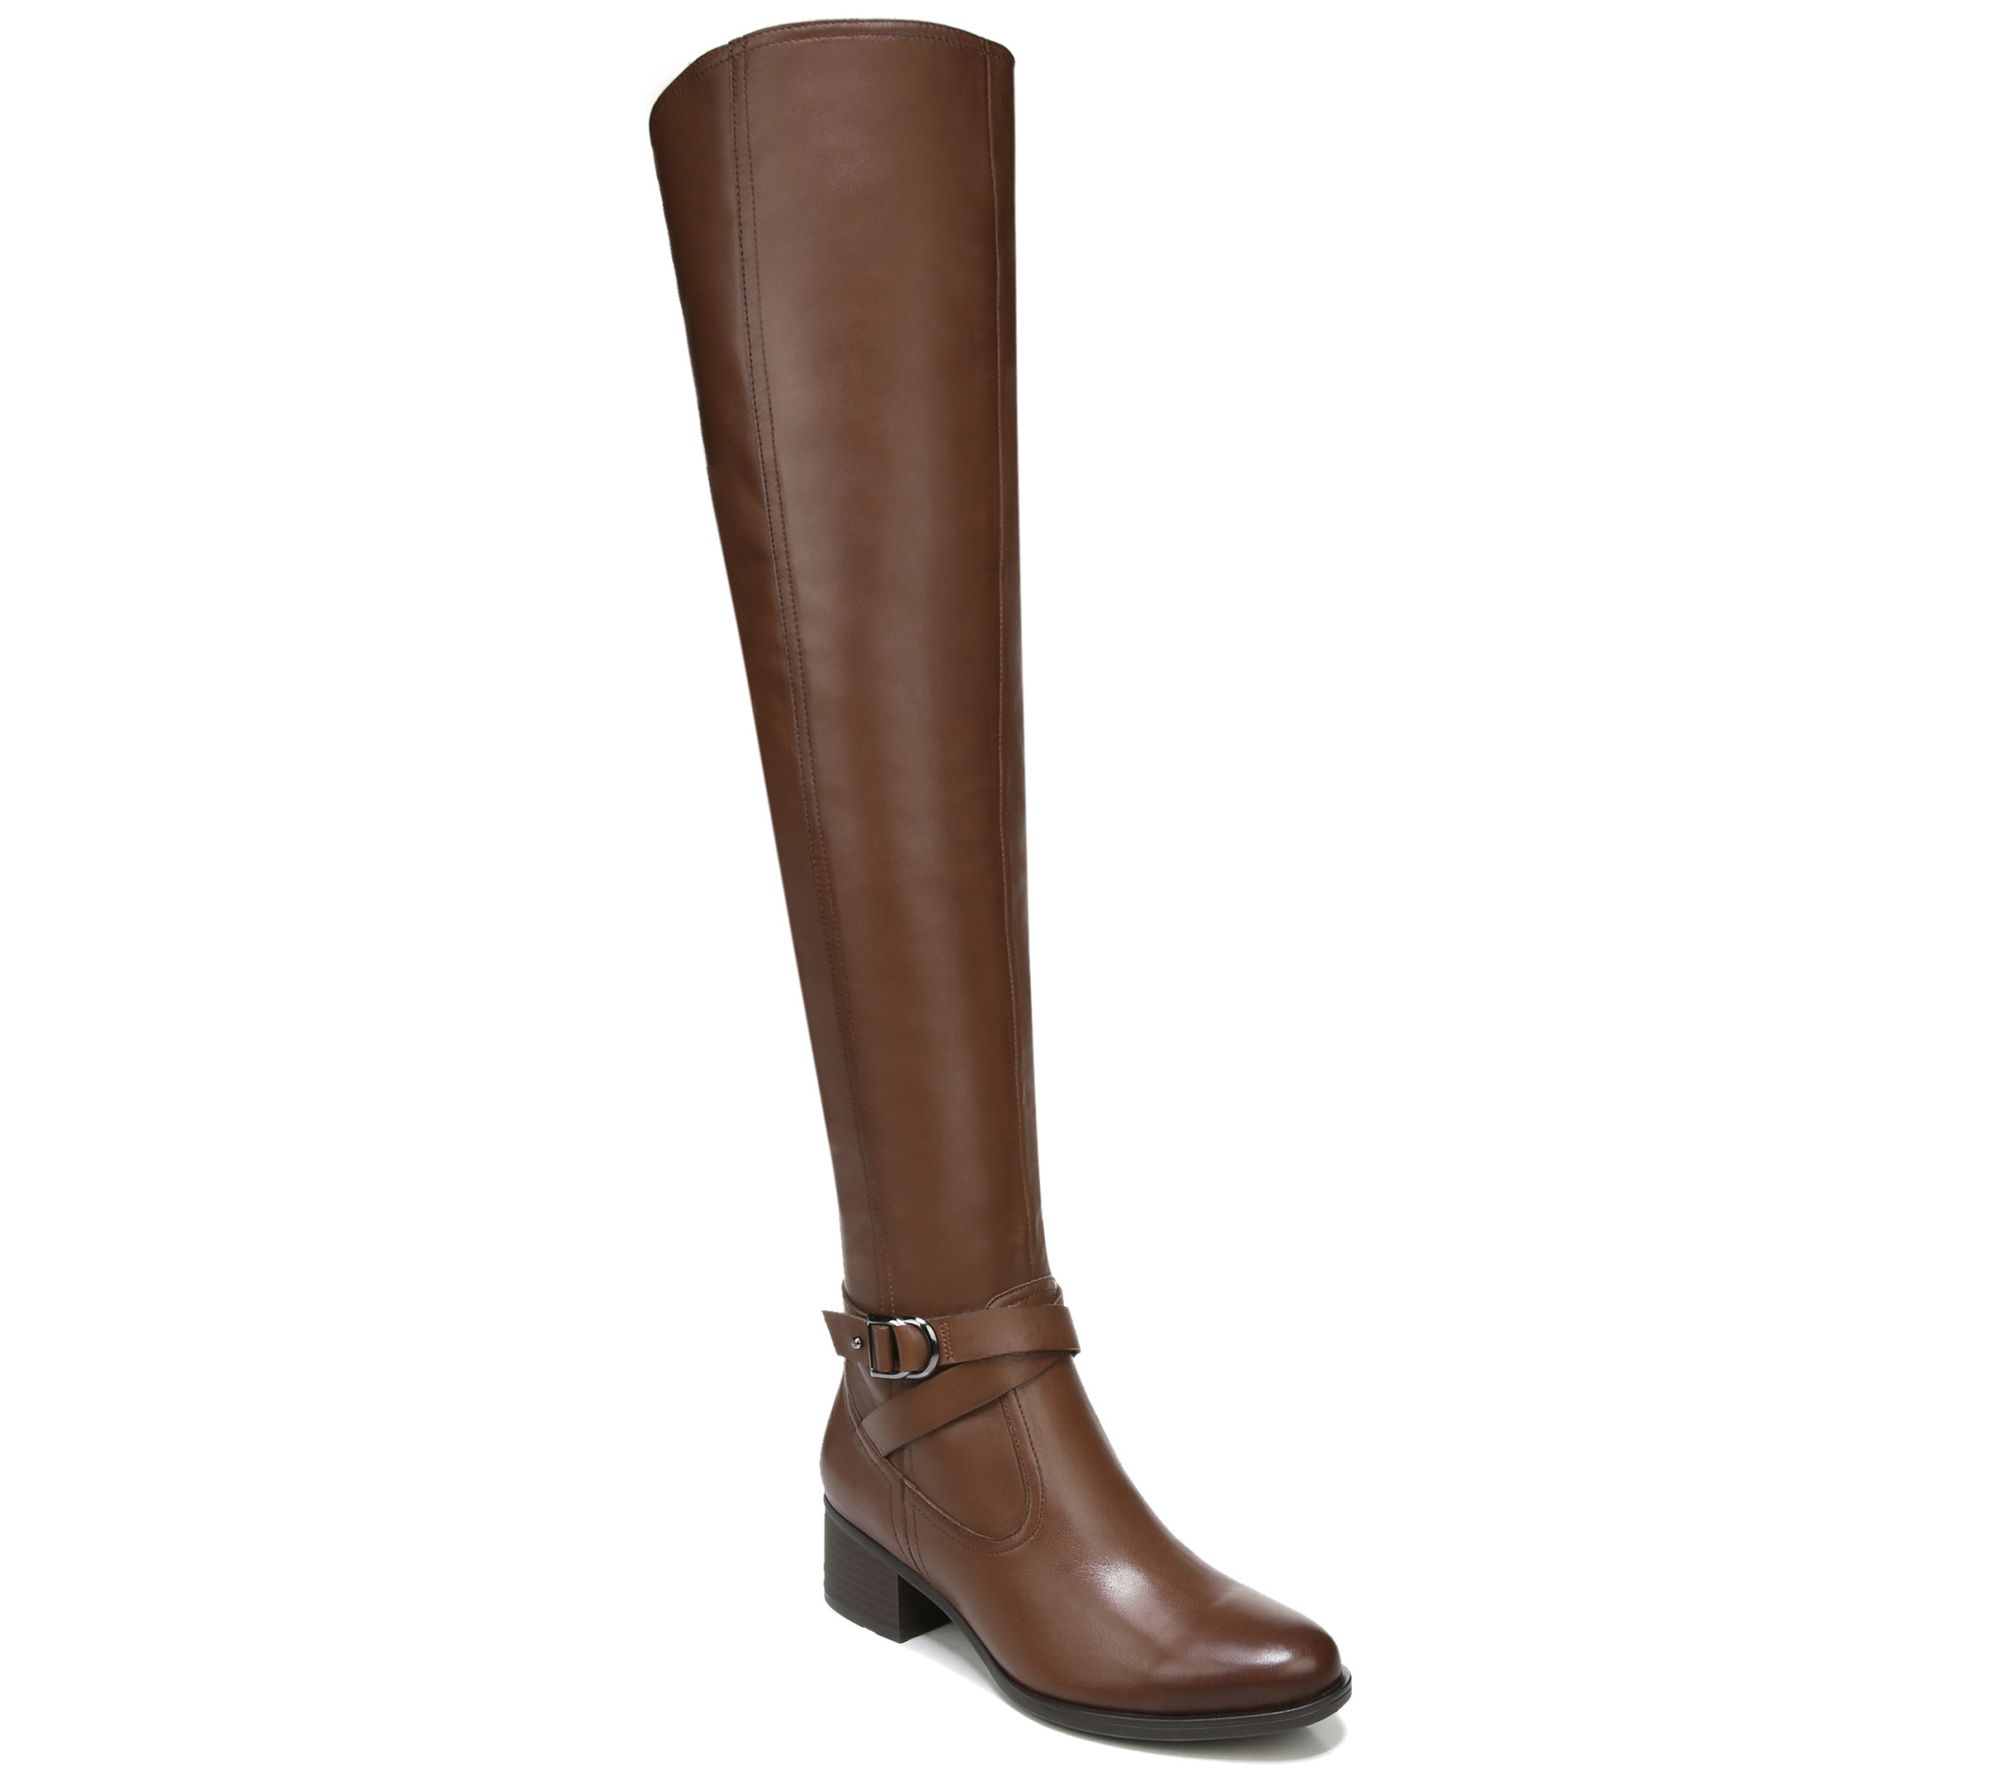 Naturalizer Leather Zipper Over The Knee Boots - Denny - QVC.com